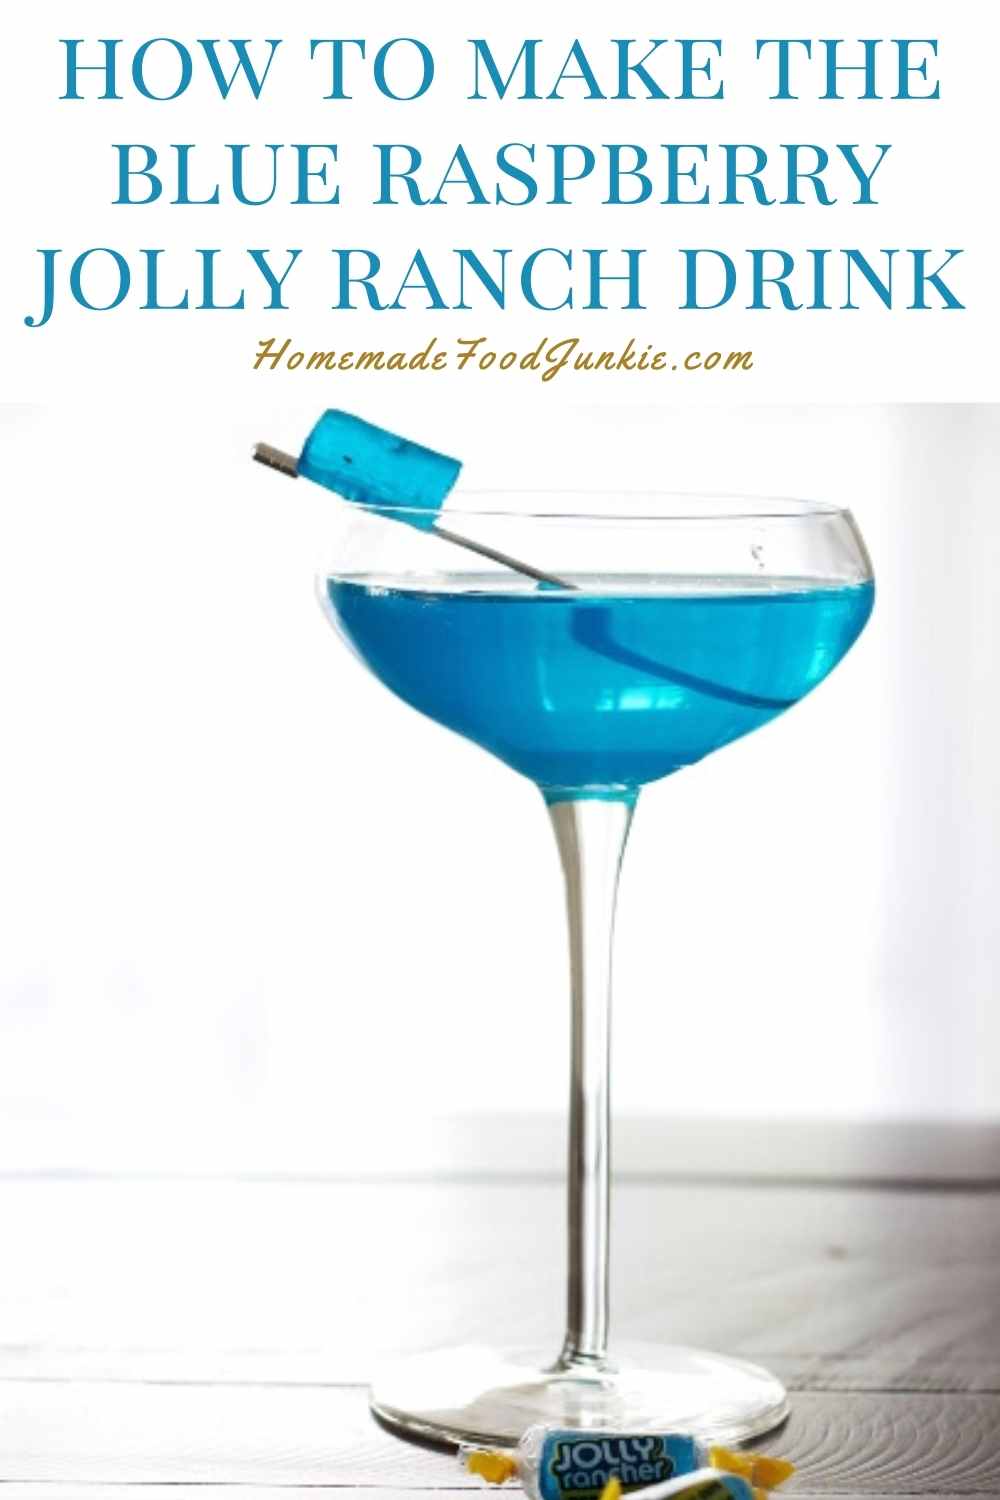 How To Make The Blue Raspberry Jolly Rancher Drink-Pin Image